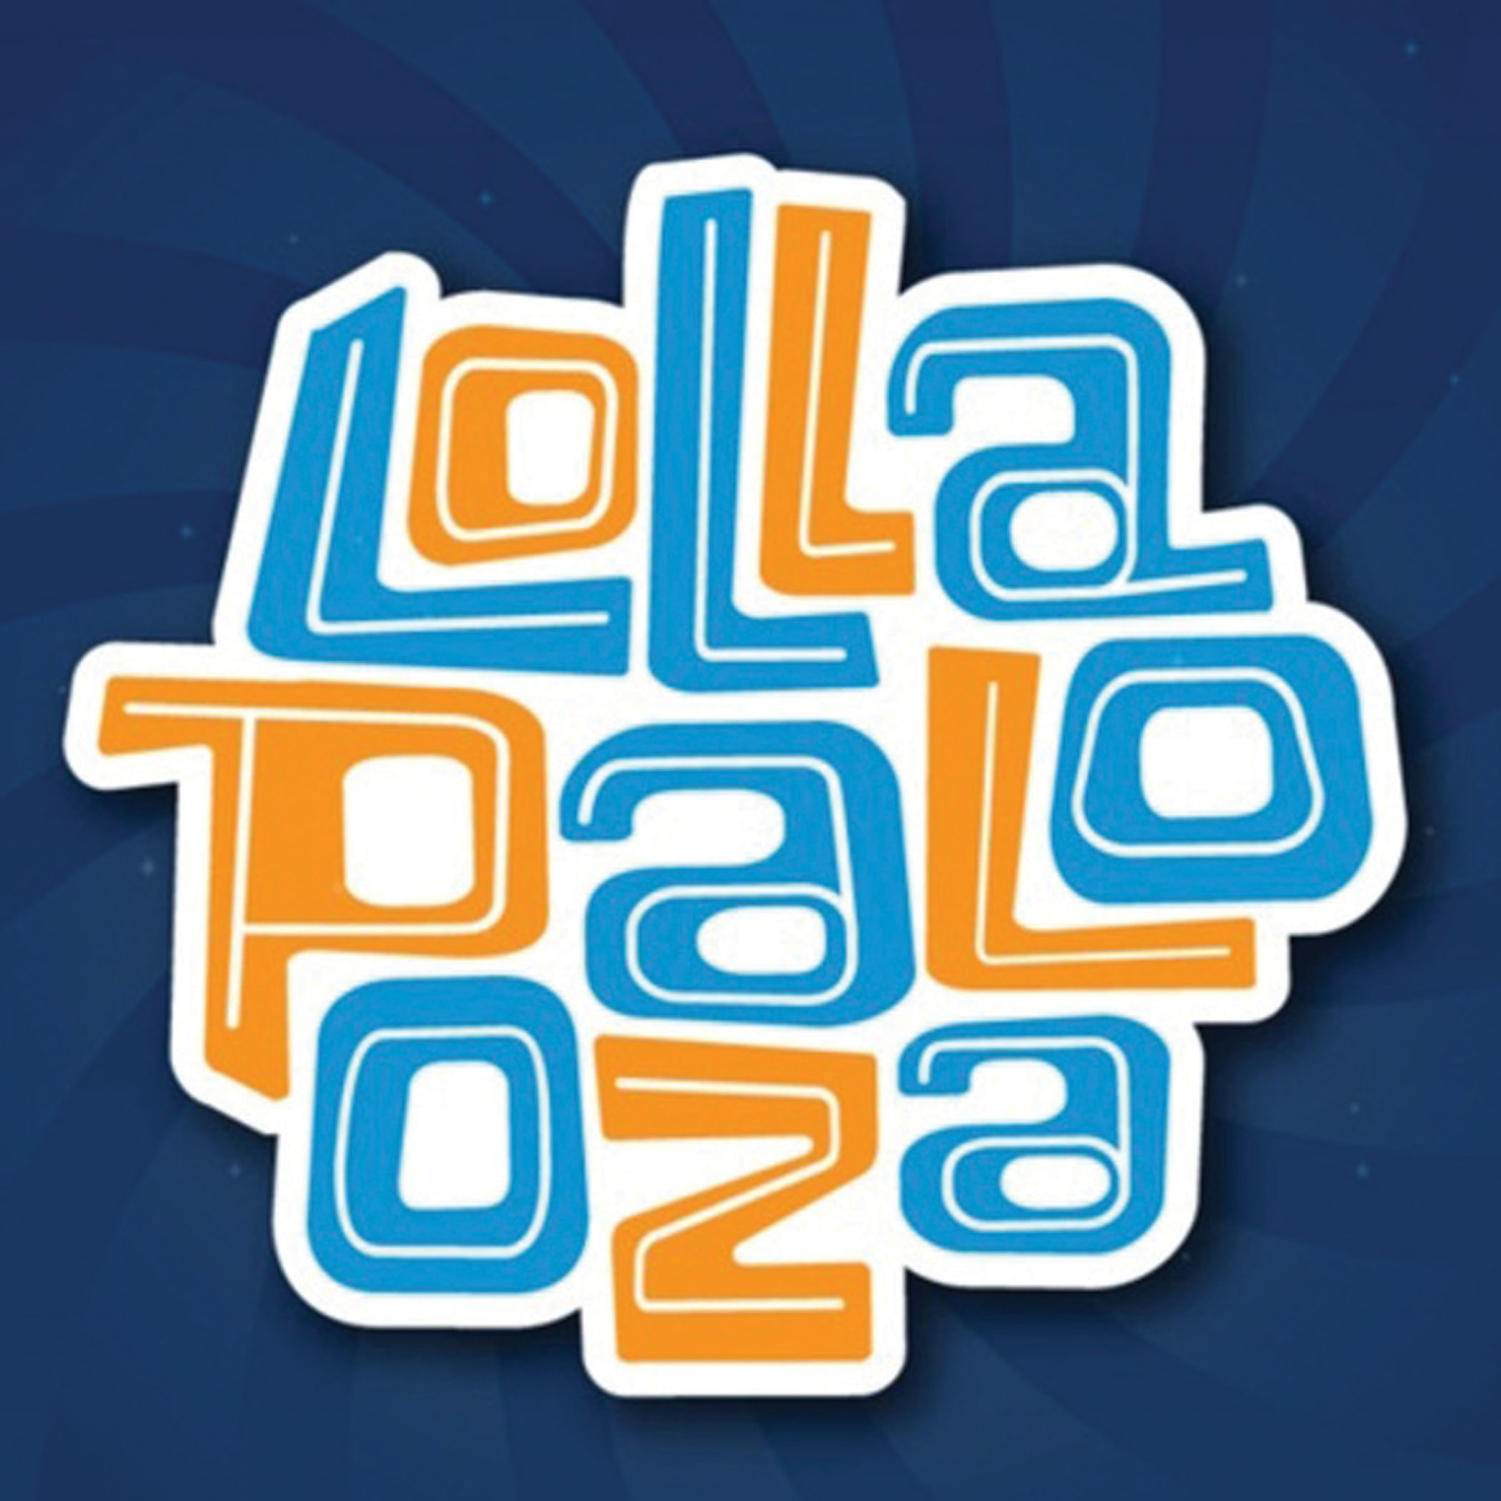 Lollapalooza is an annual, three day music festival that will be held in Grant Park this August.